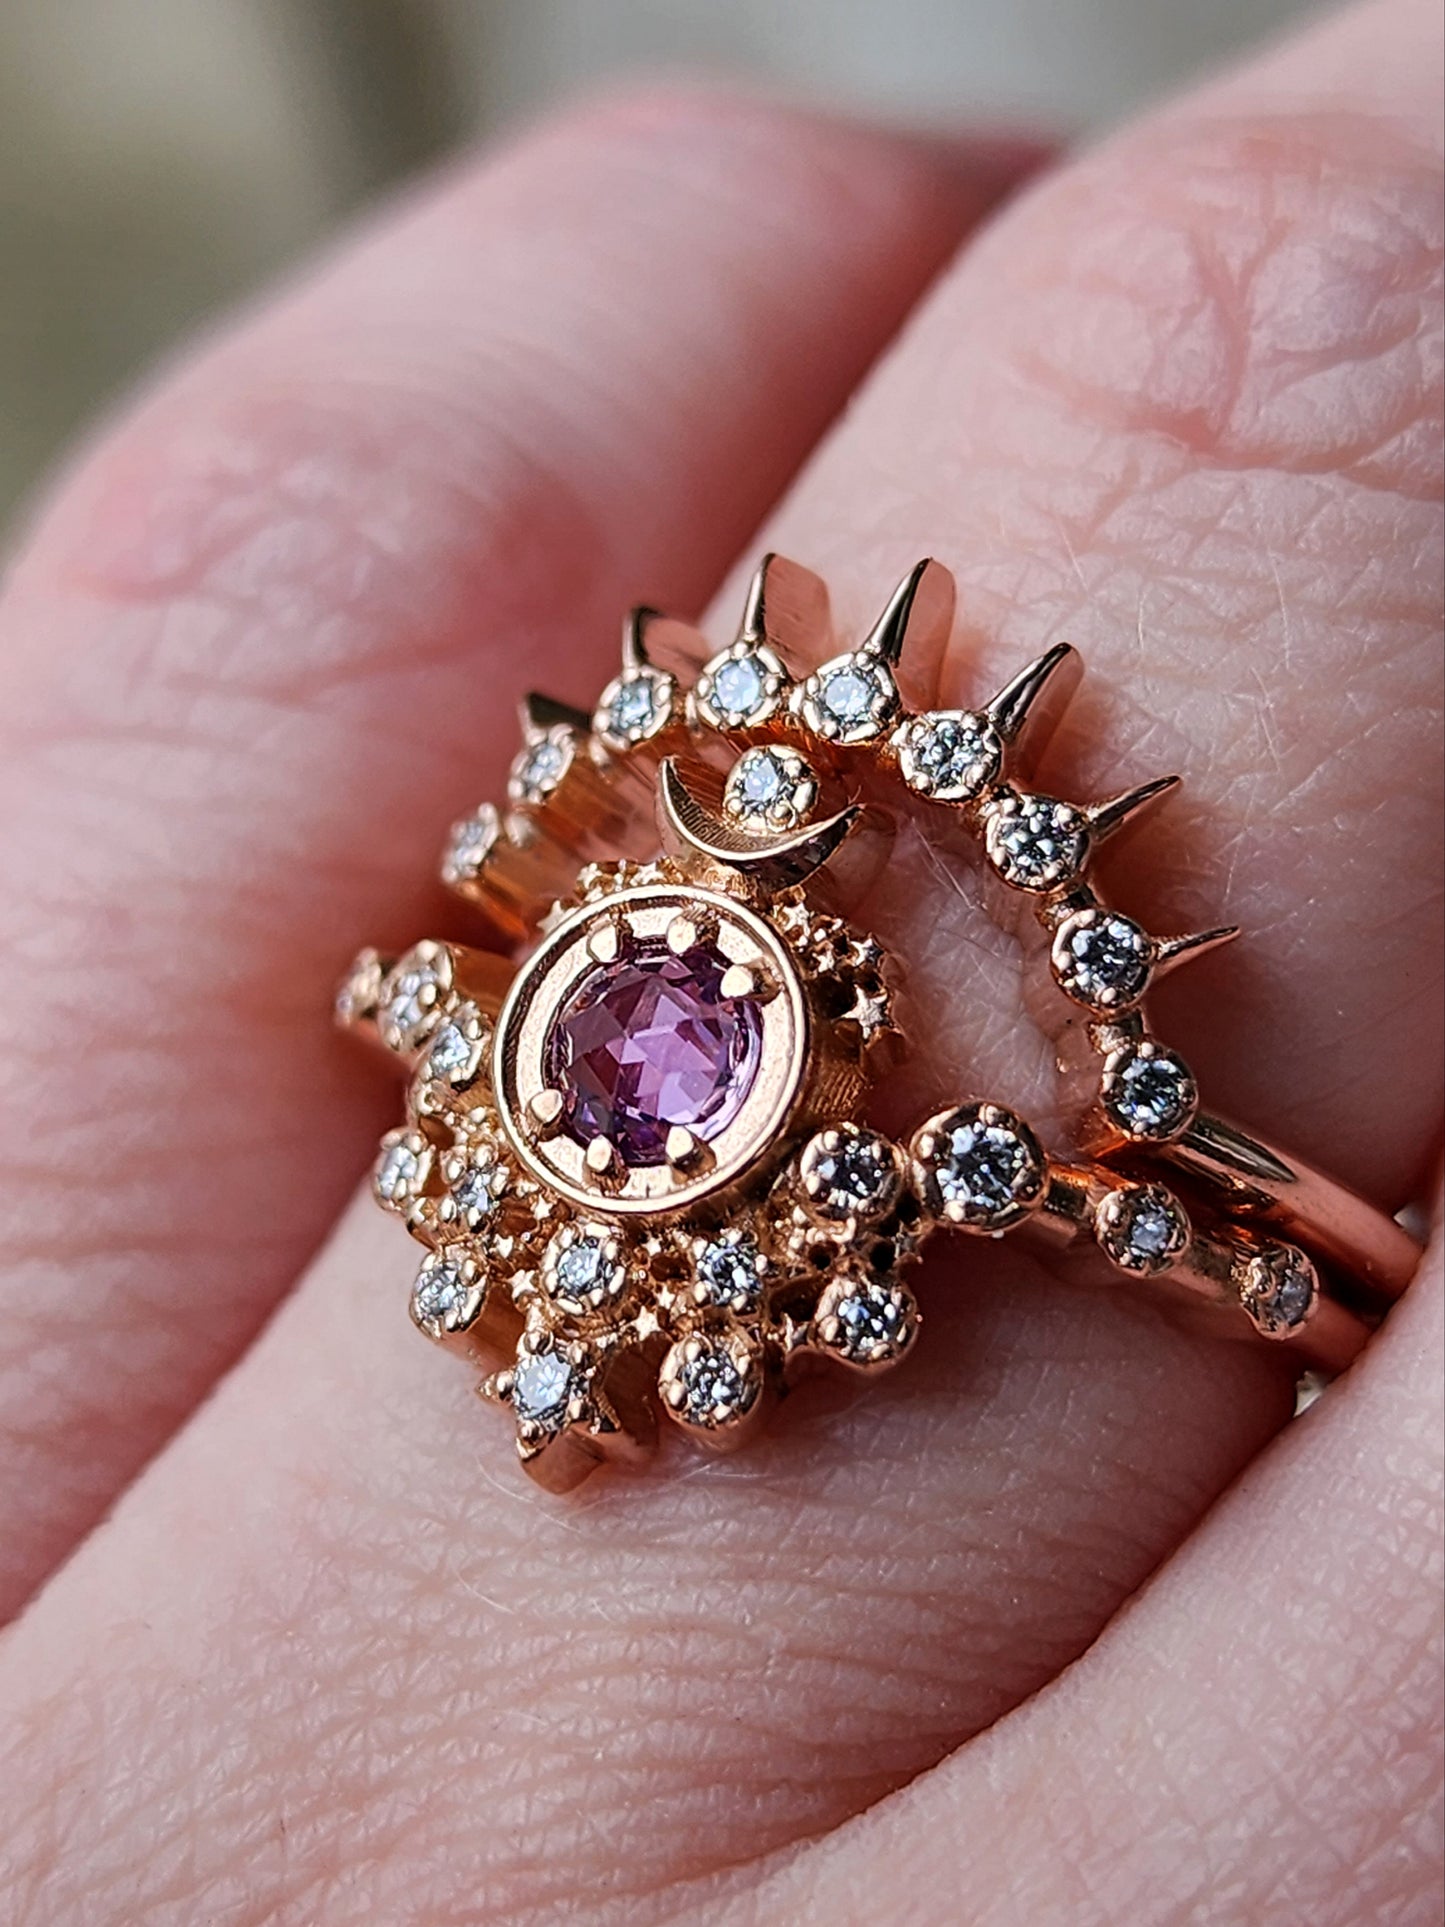 Rose Cut Purple Sapphire Moon Witch Engagement Ring Set with Diamonds and Stardust - 14k Rose Gold - Celestial Lunar Wedding Ring Set